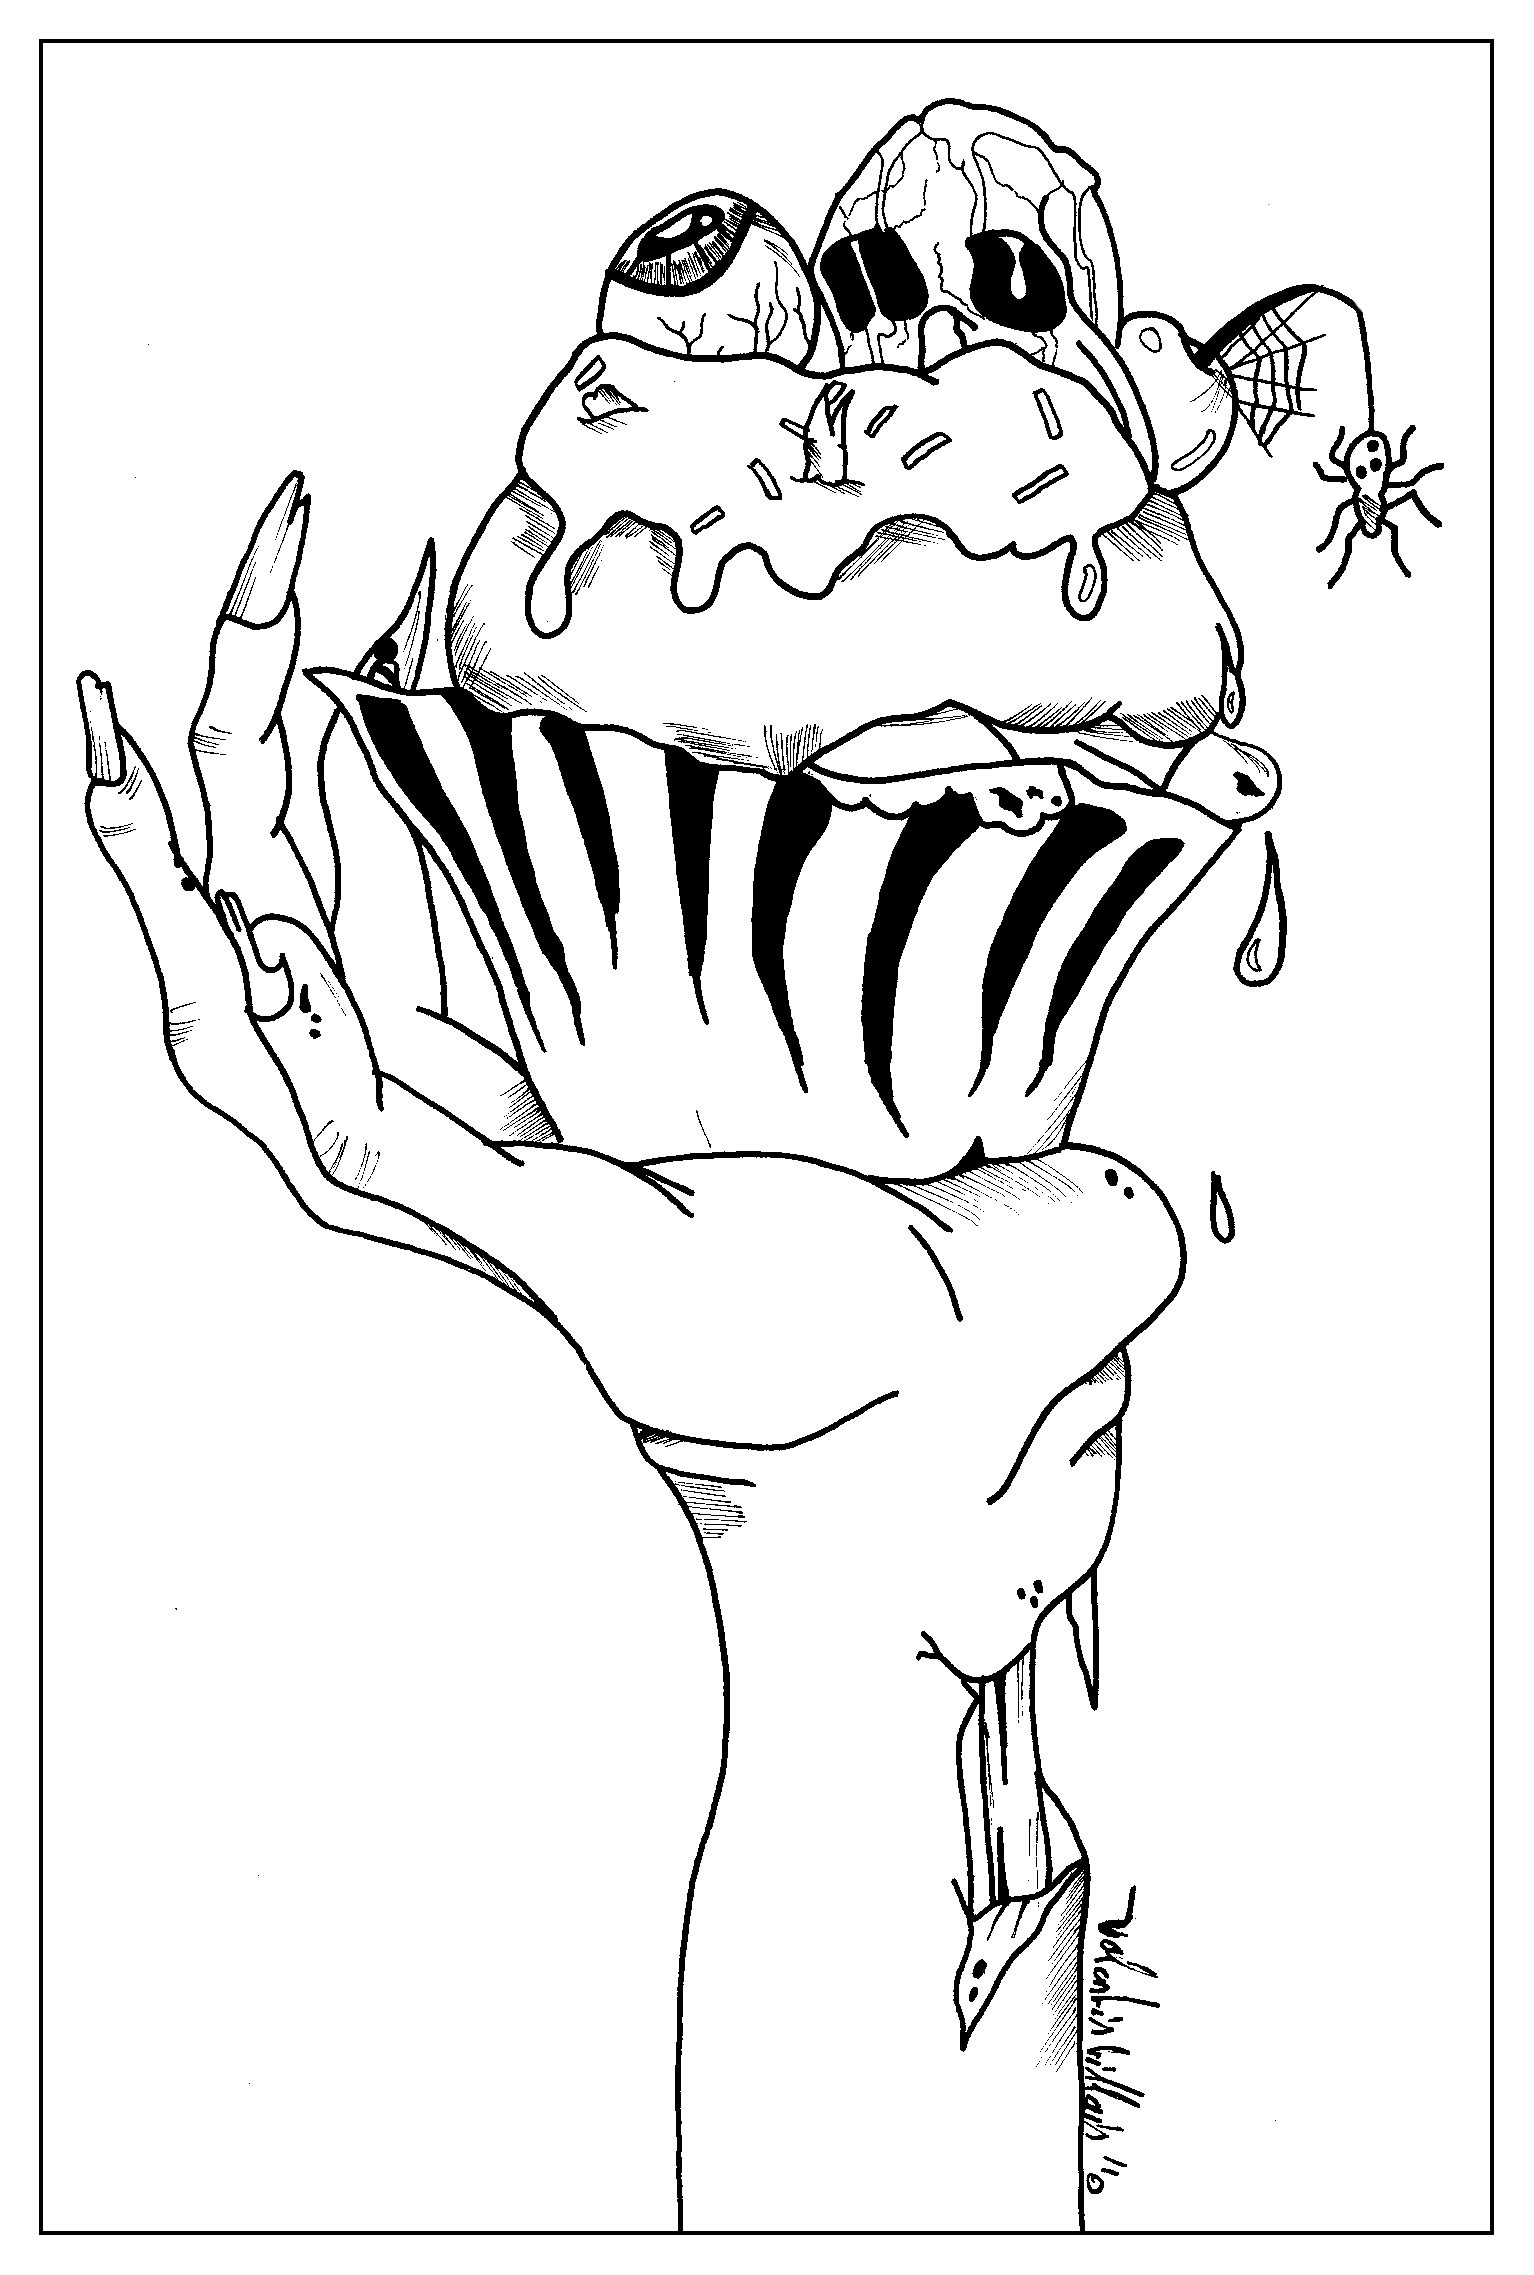 Cup Cake for a Zombie, Artist : Valentin